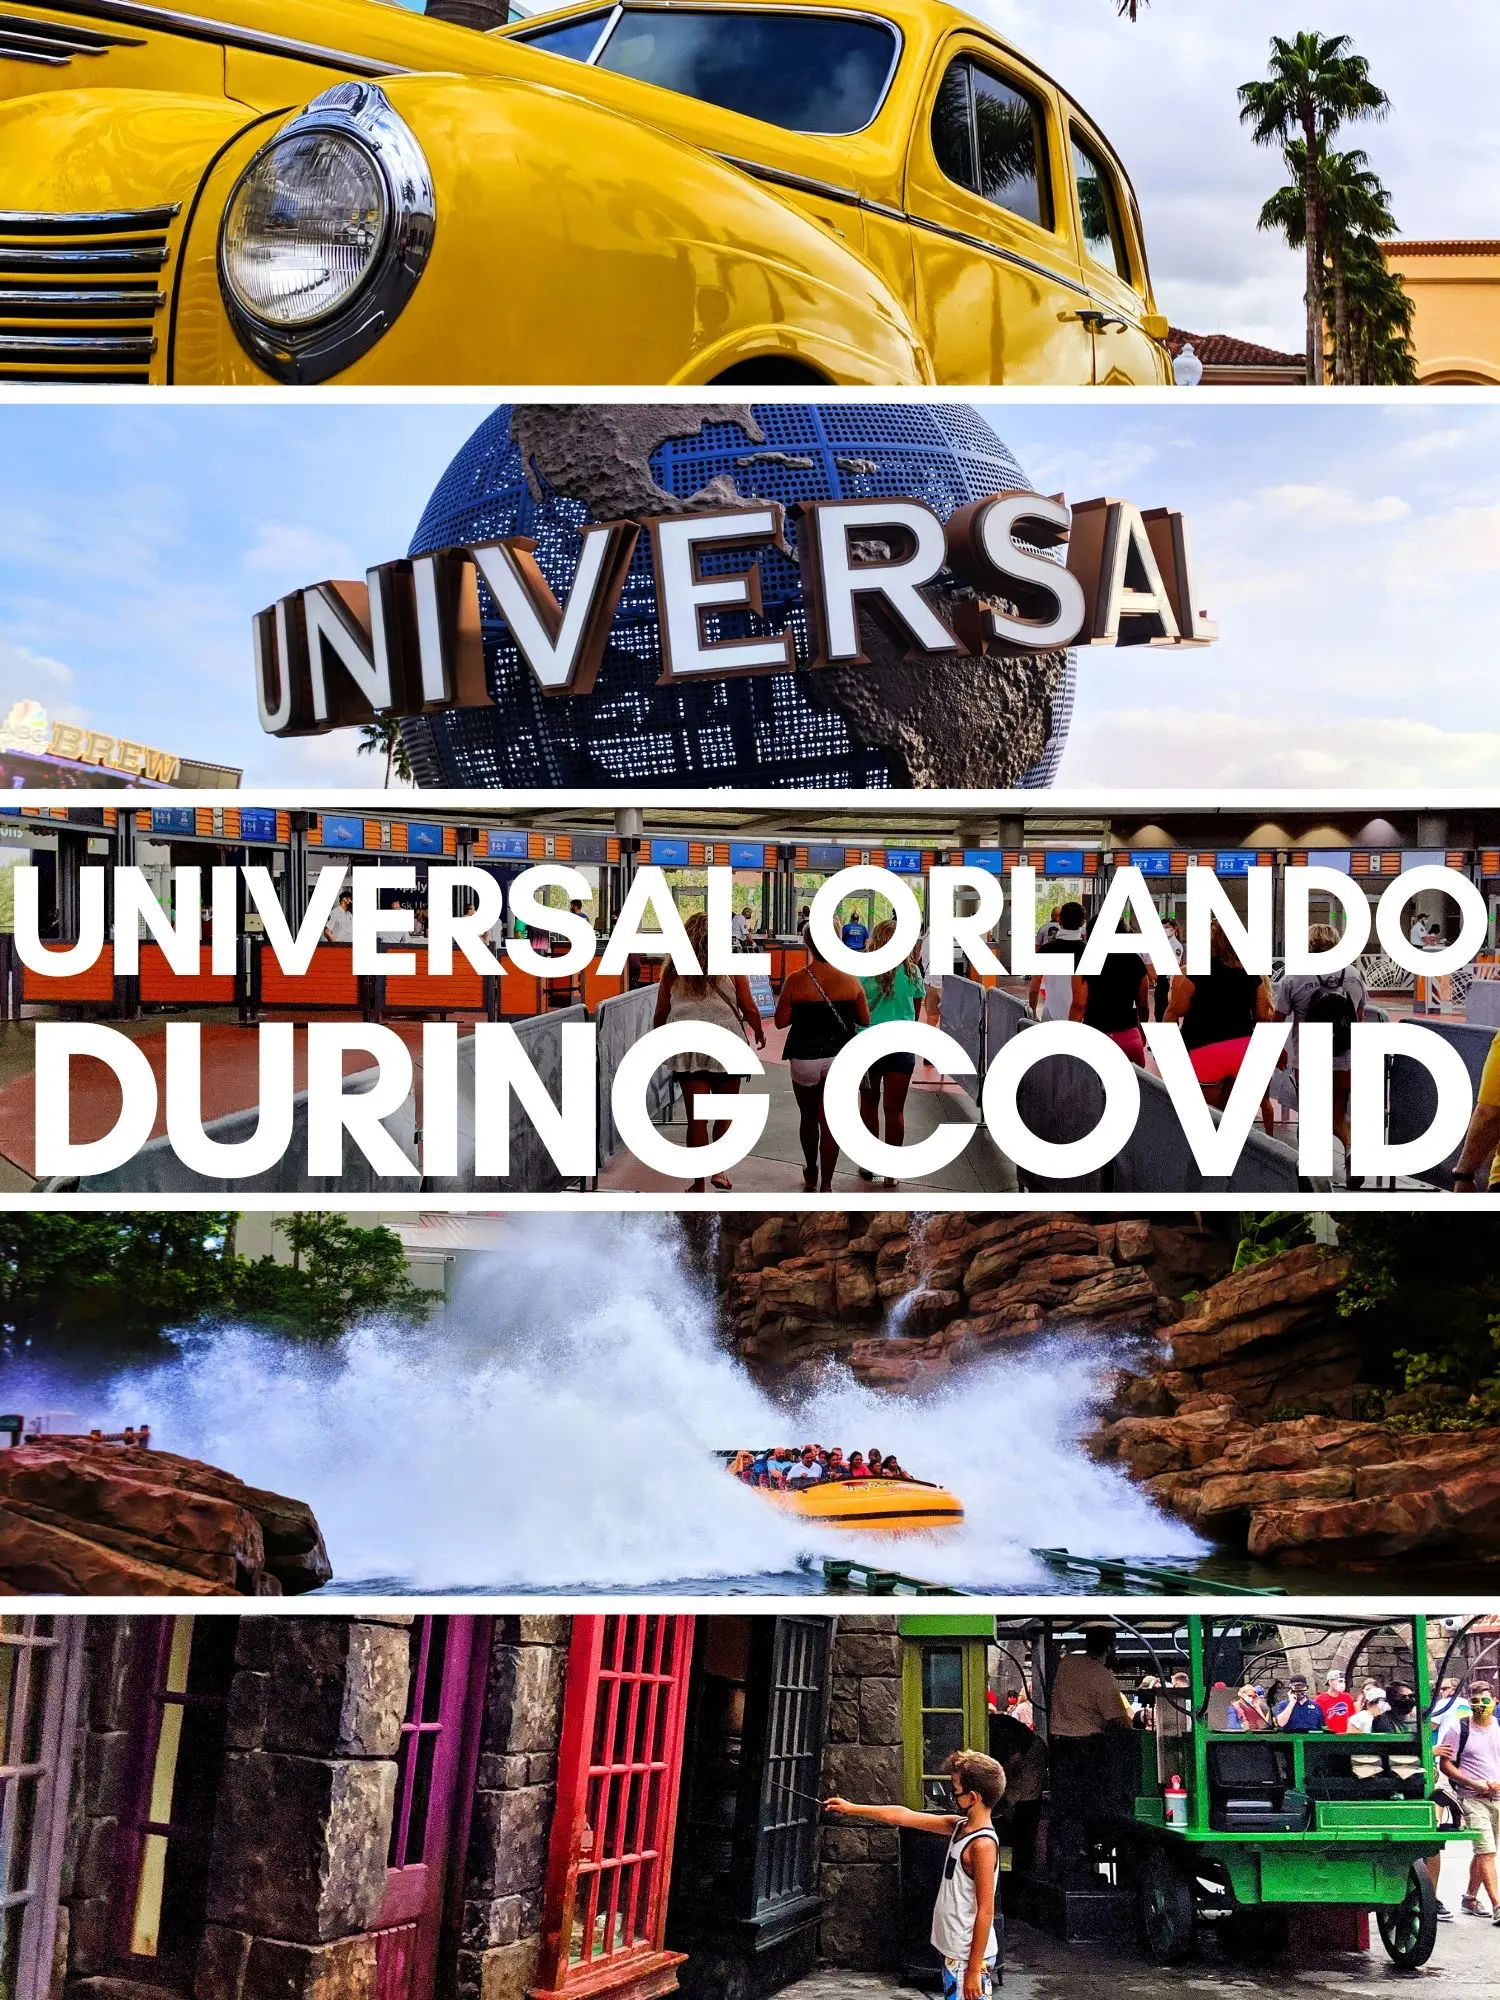 Visiting Universal Orlando during COVID is different. Health and safety precautions as well as low capacity and smaller crowds make visiting Universal during Coronavirus easy.